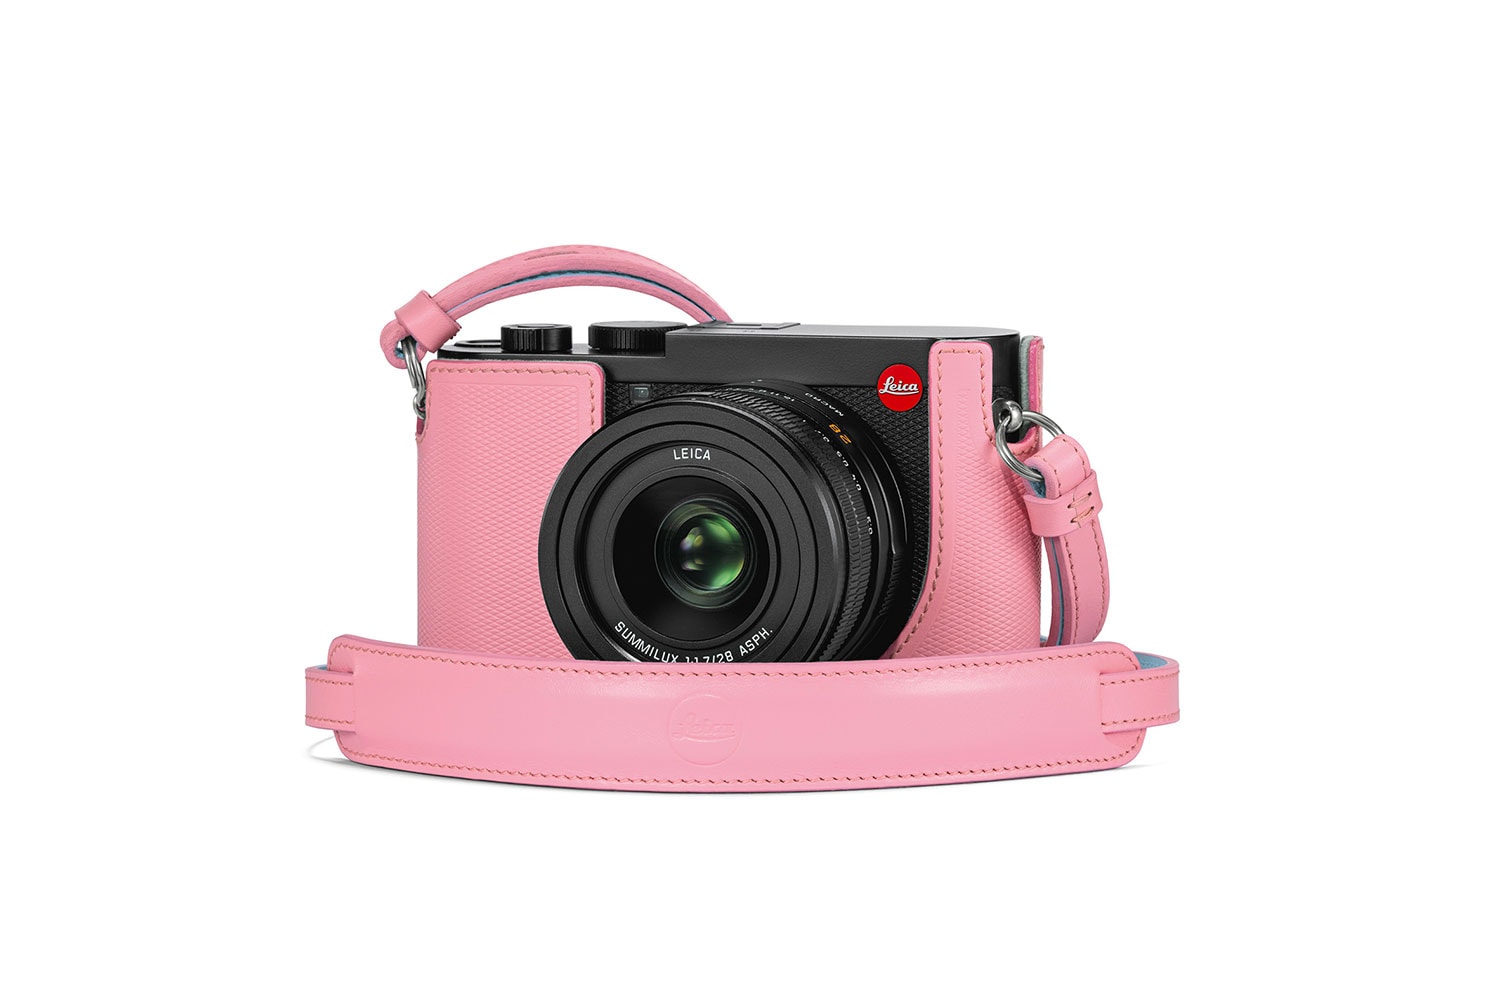 leica camera q2 d-lux travel tote bag wicker basket protector leather blue pink